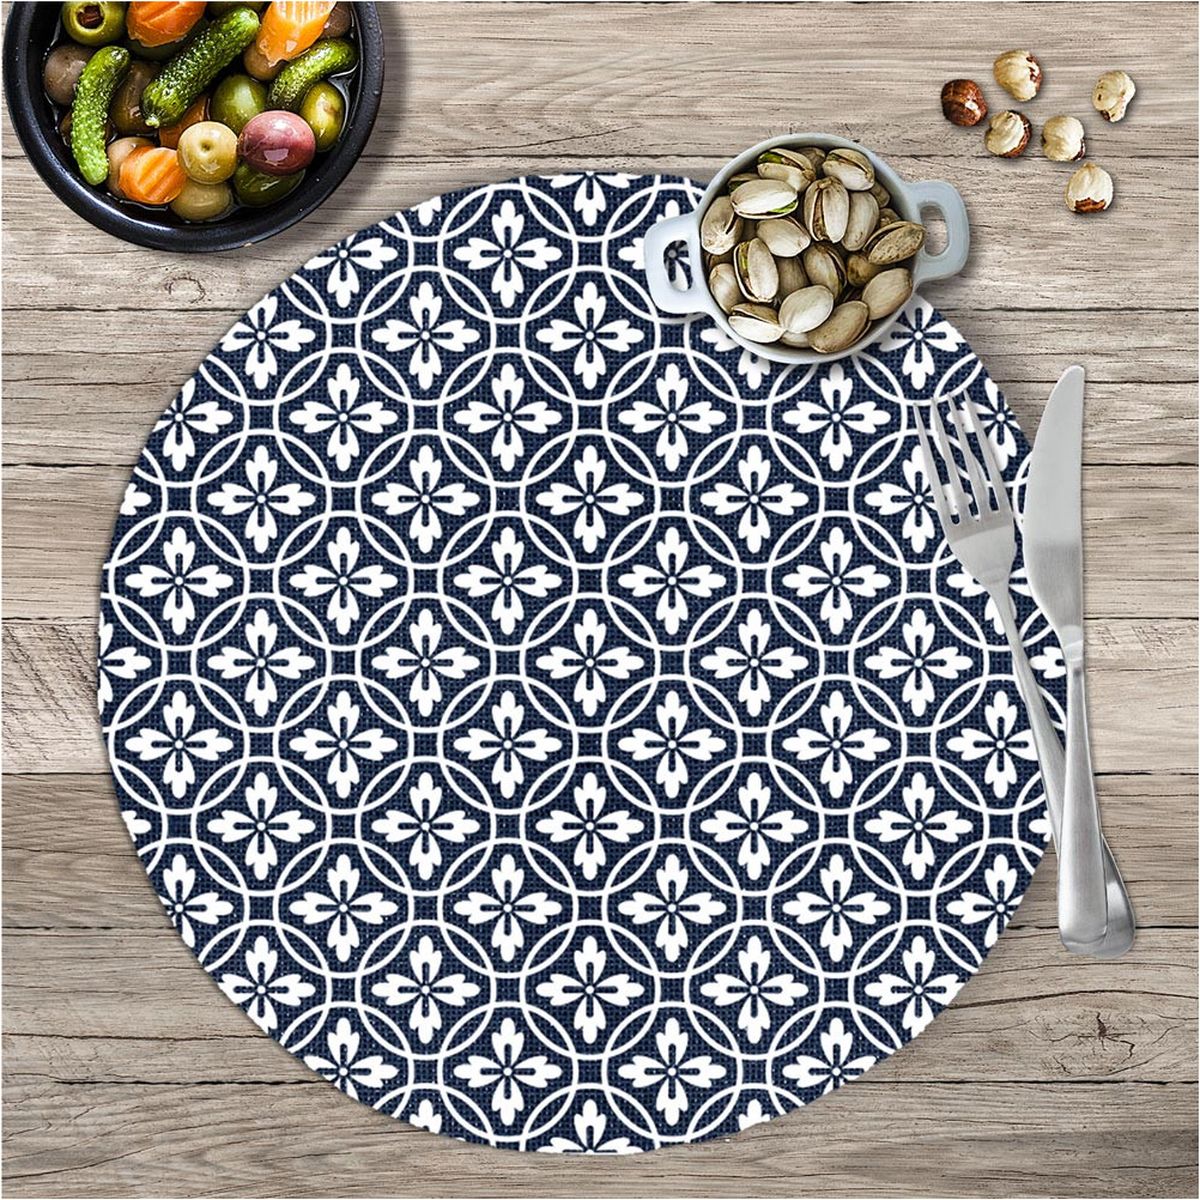 Blue and White Cement Tile Round Placemat